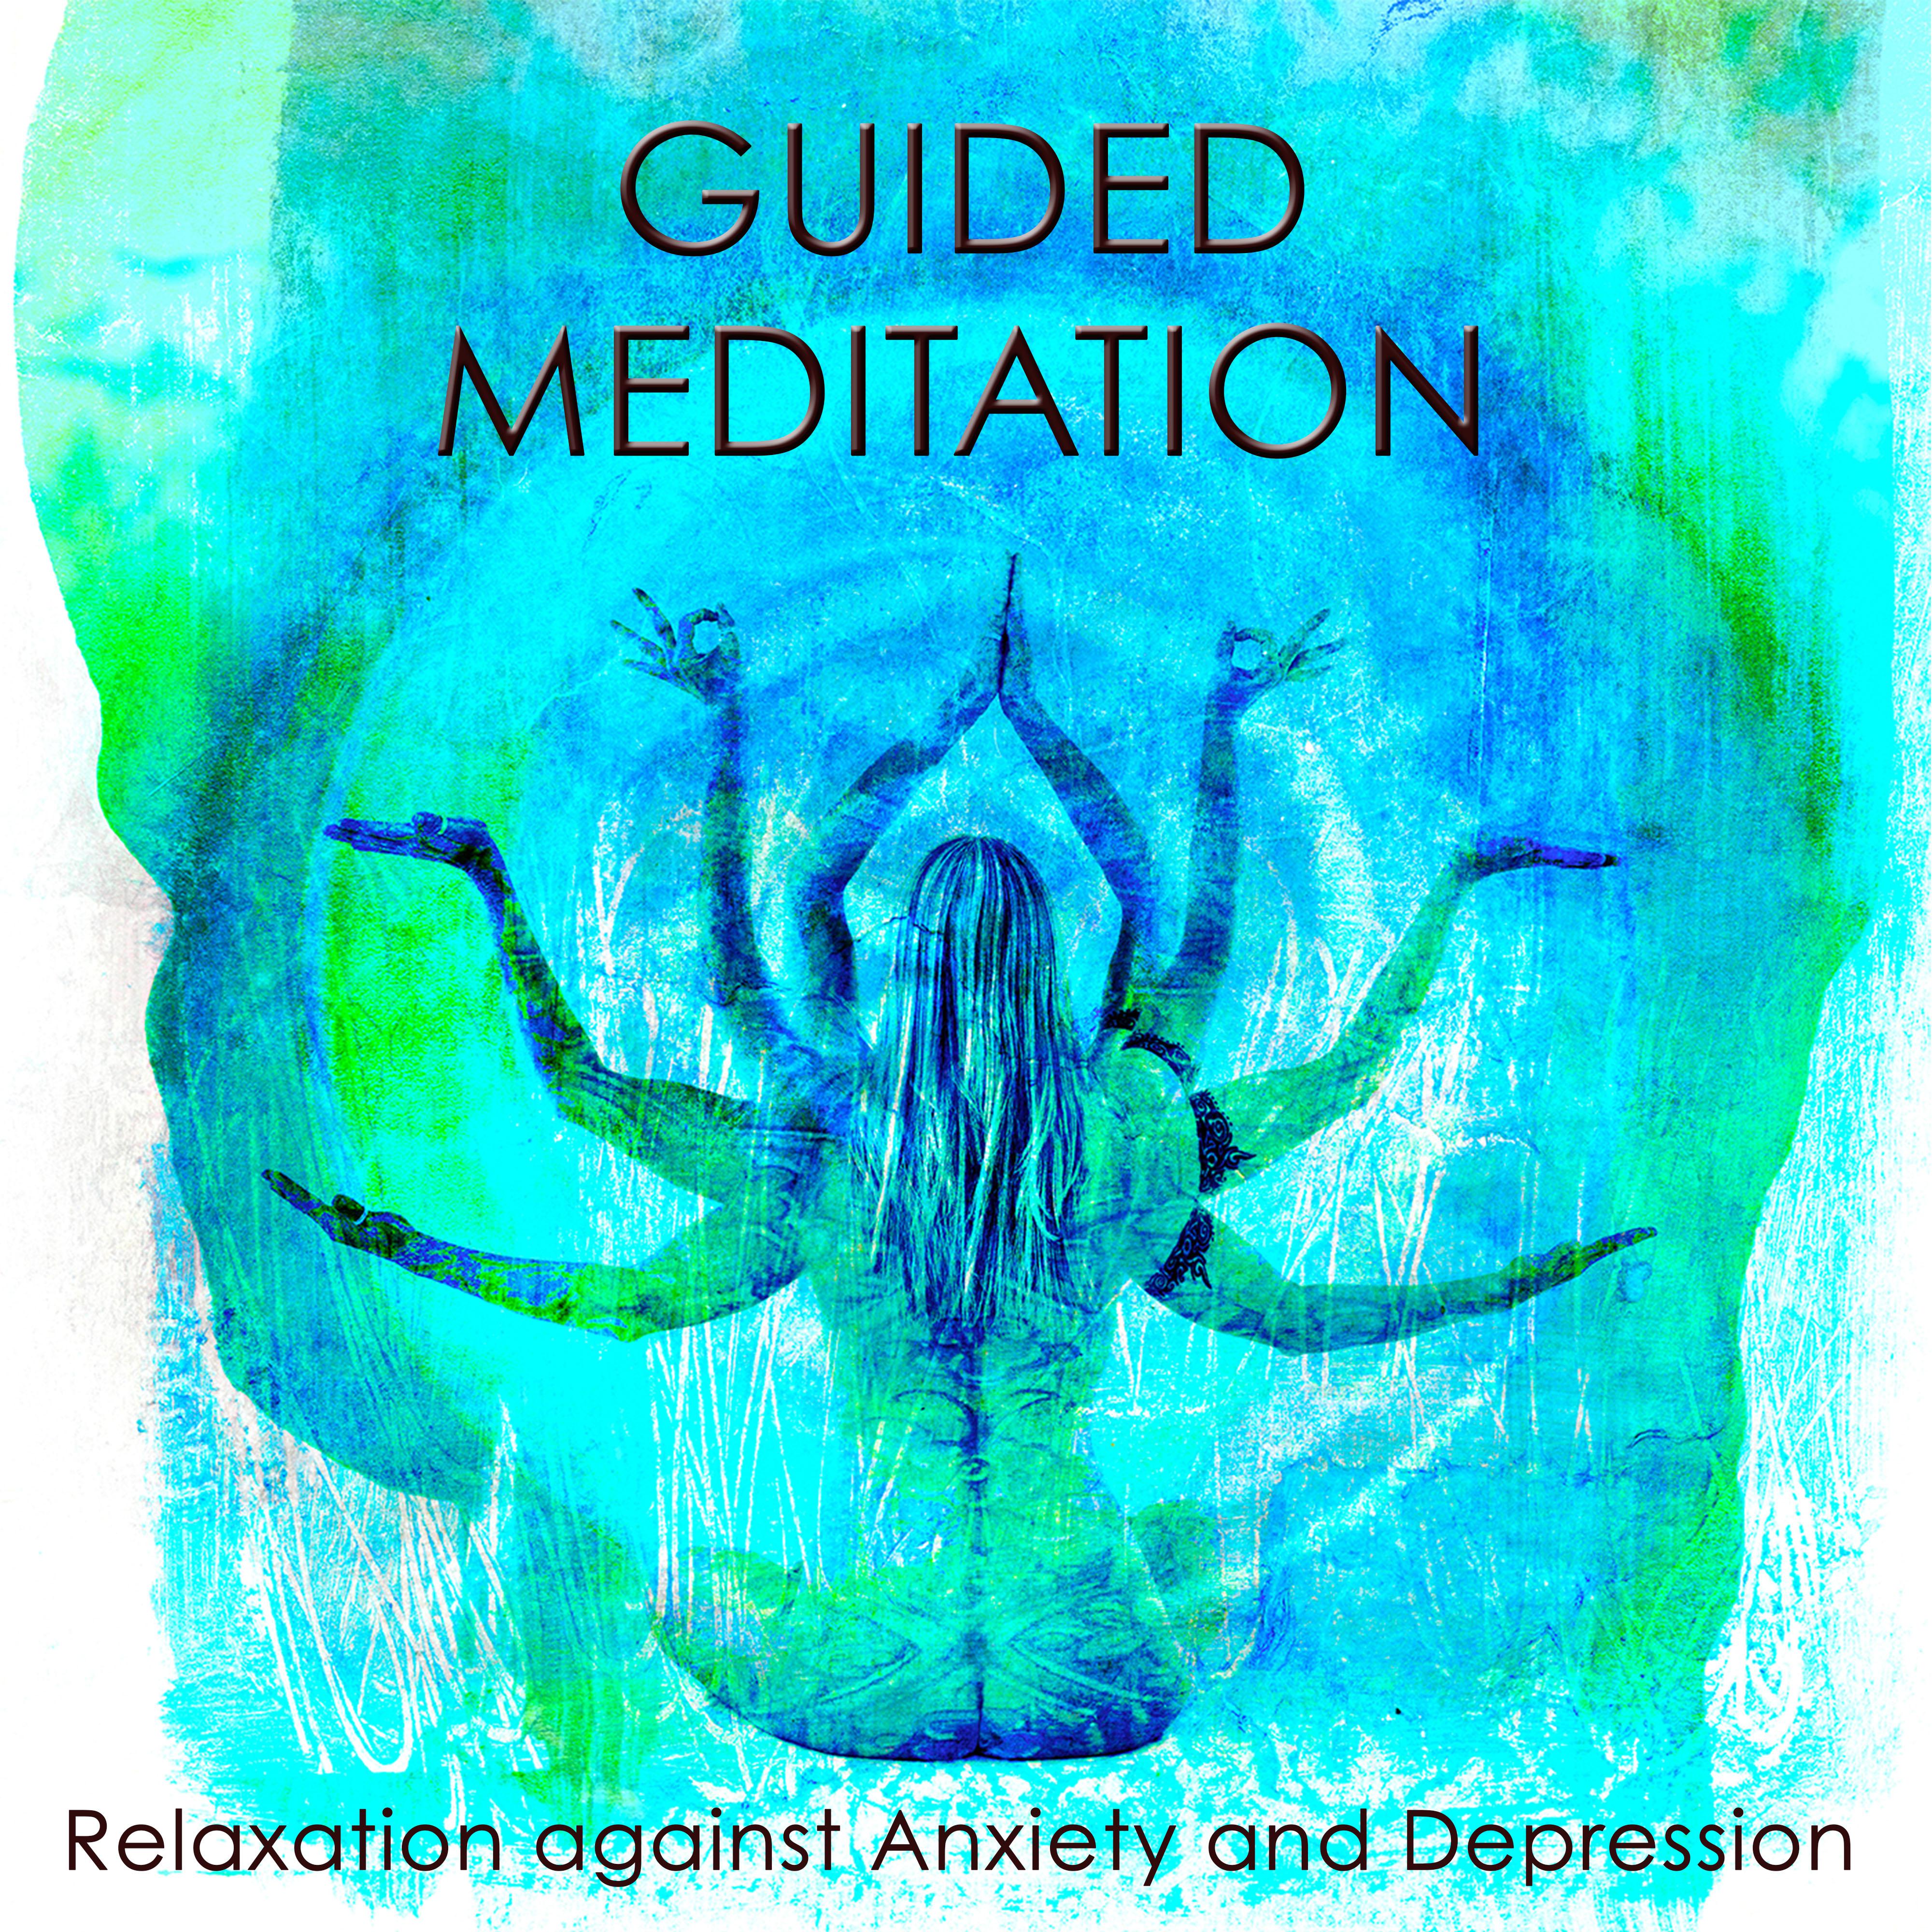 Health Care and Relaxation Meditation